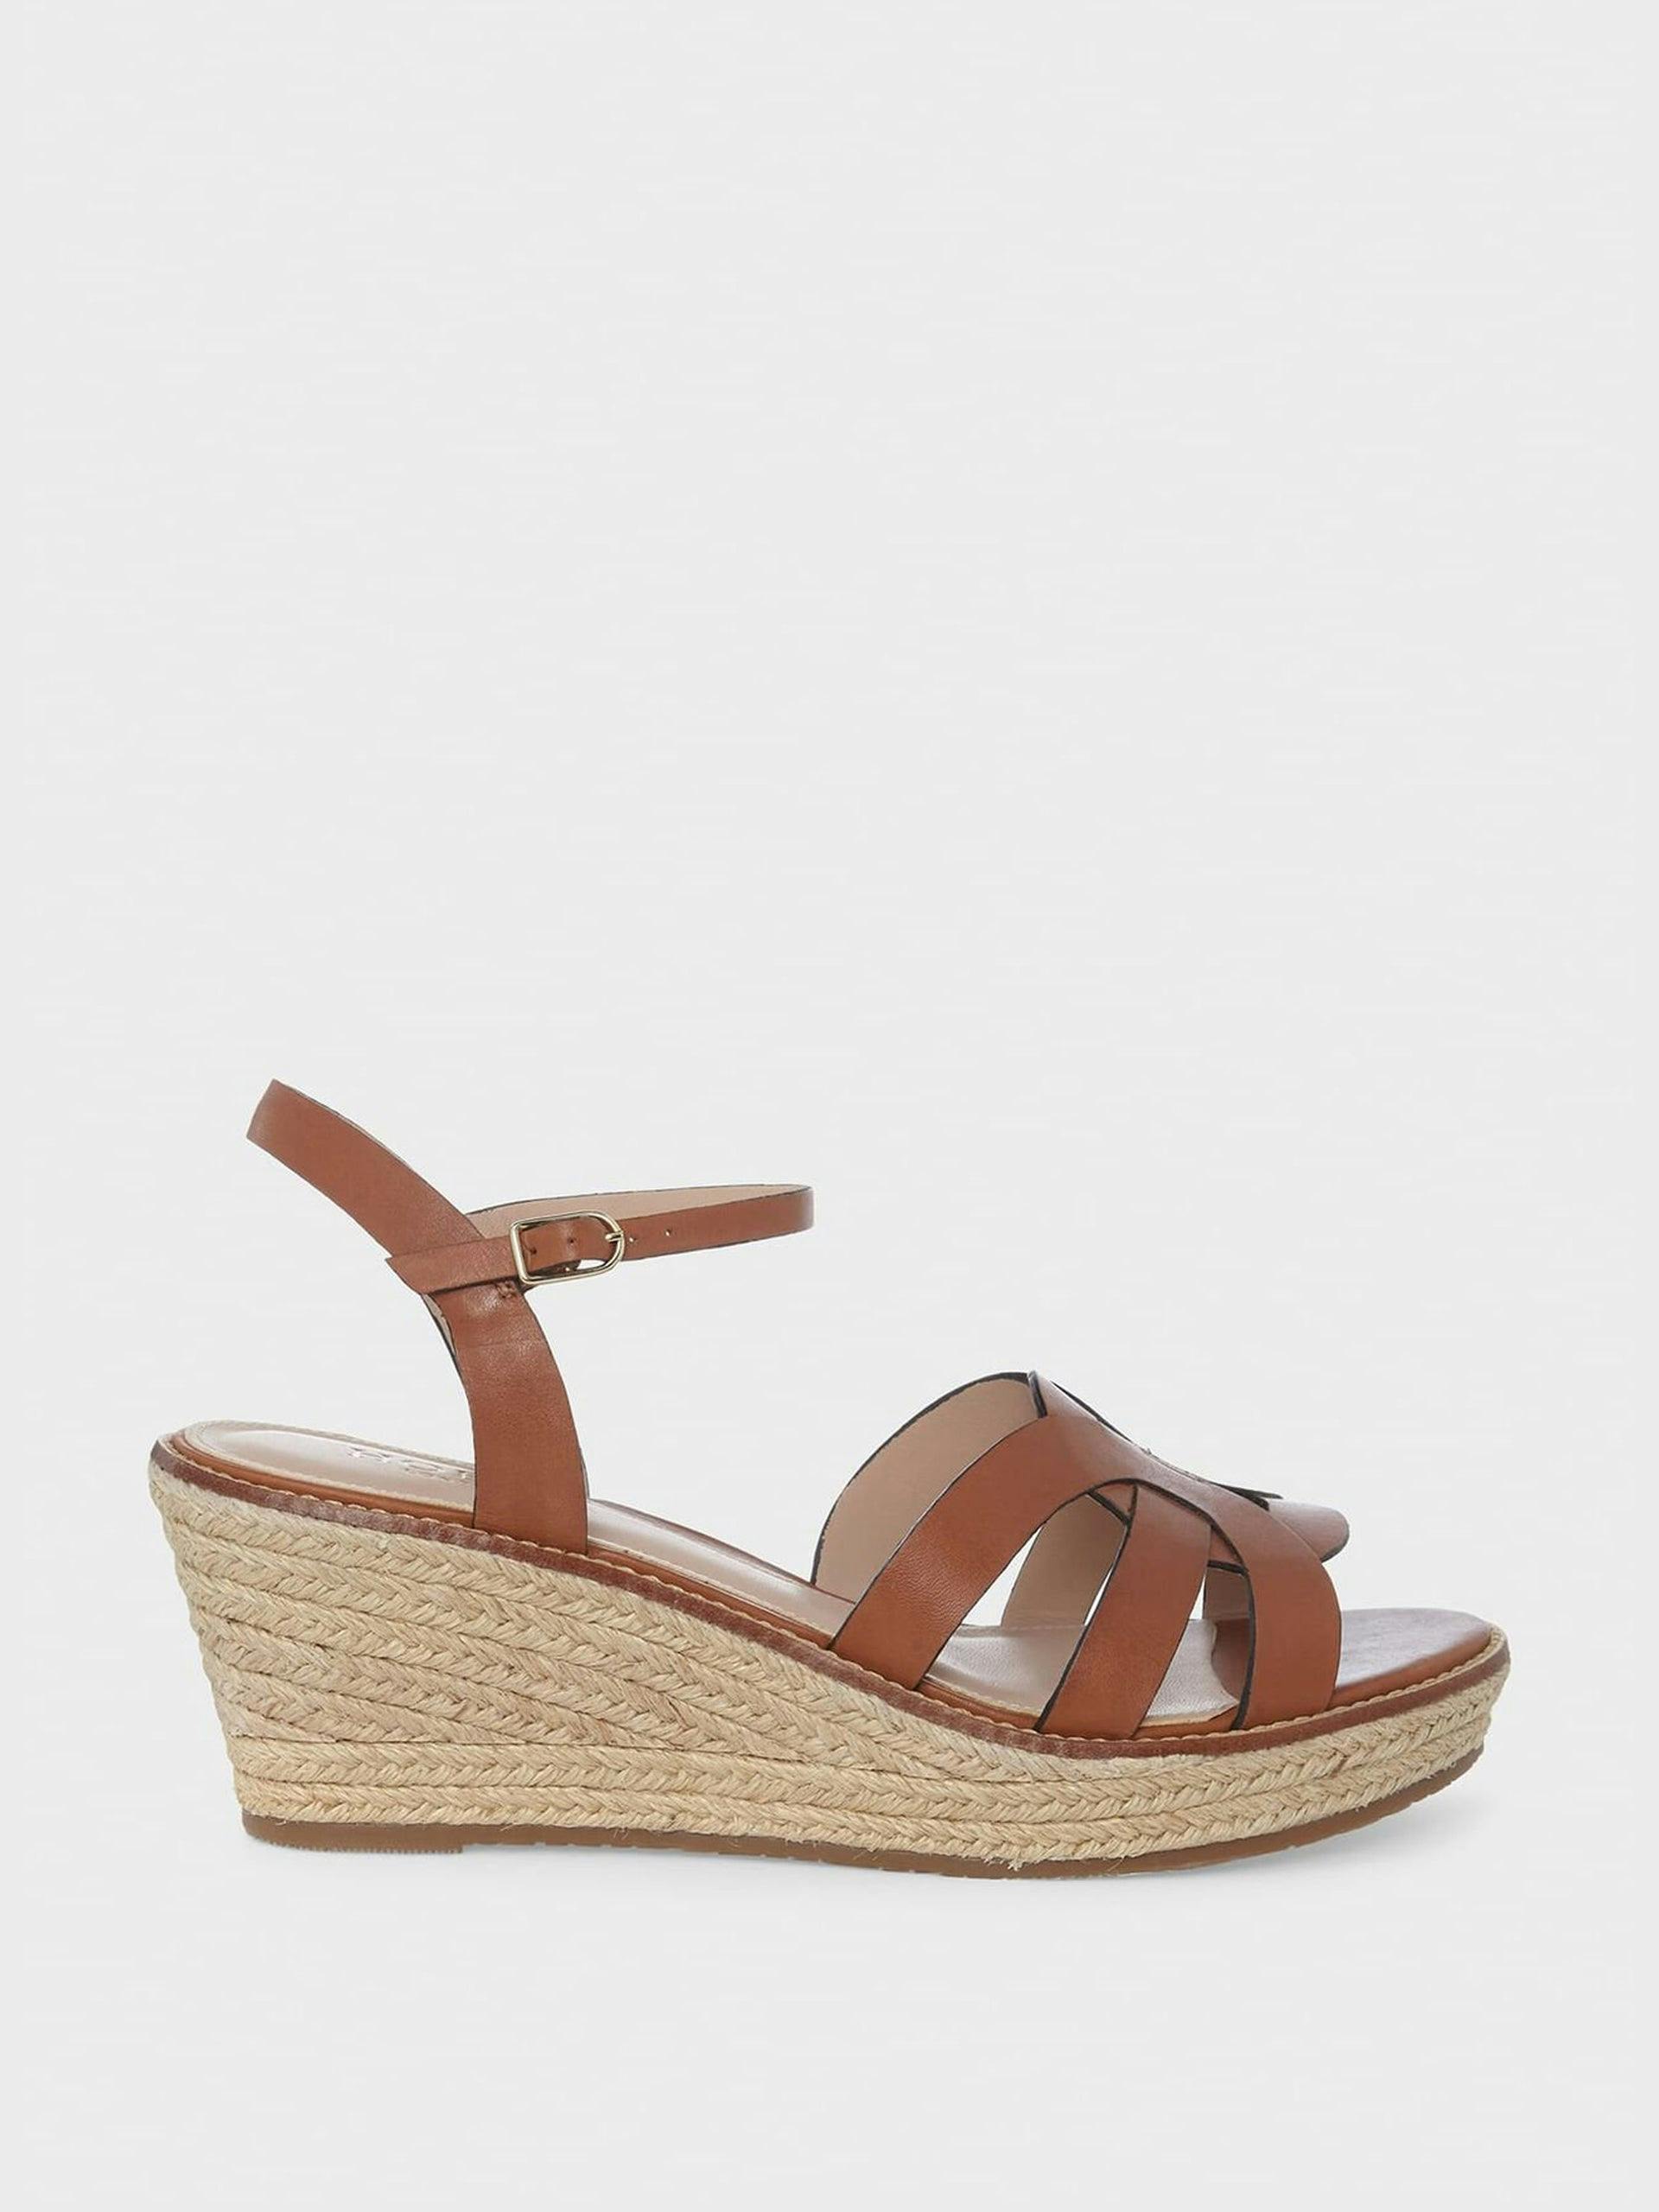 Brown leather espadrilles